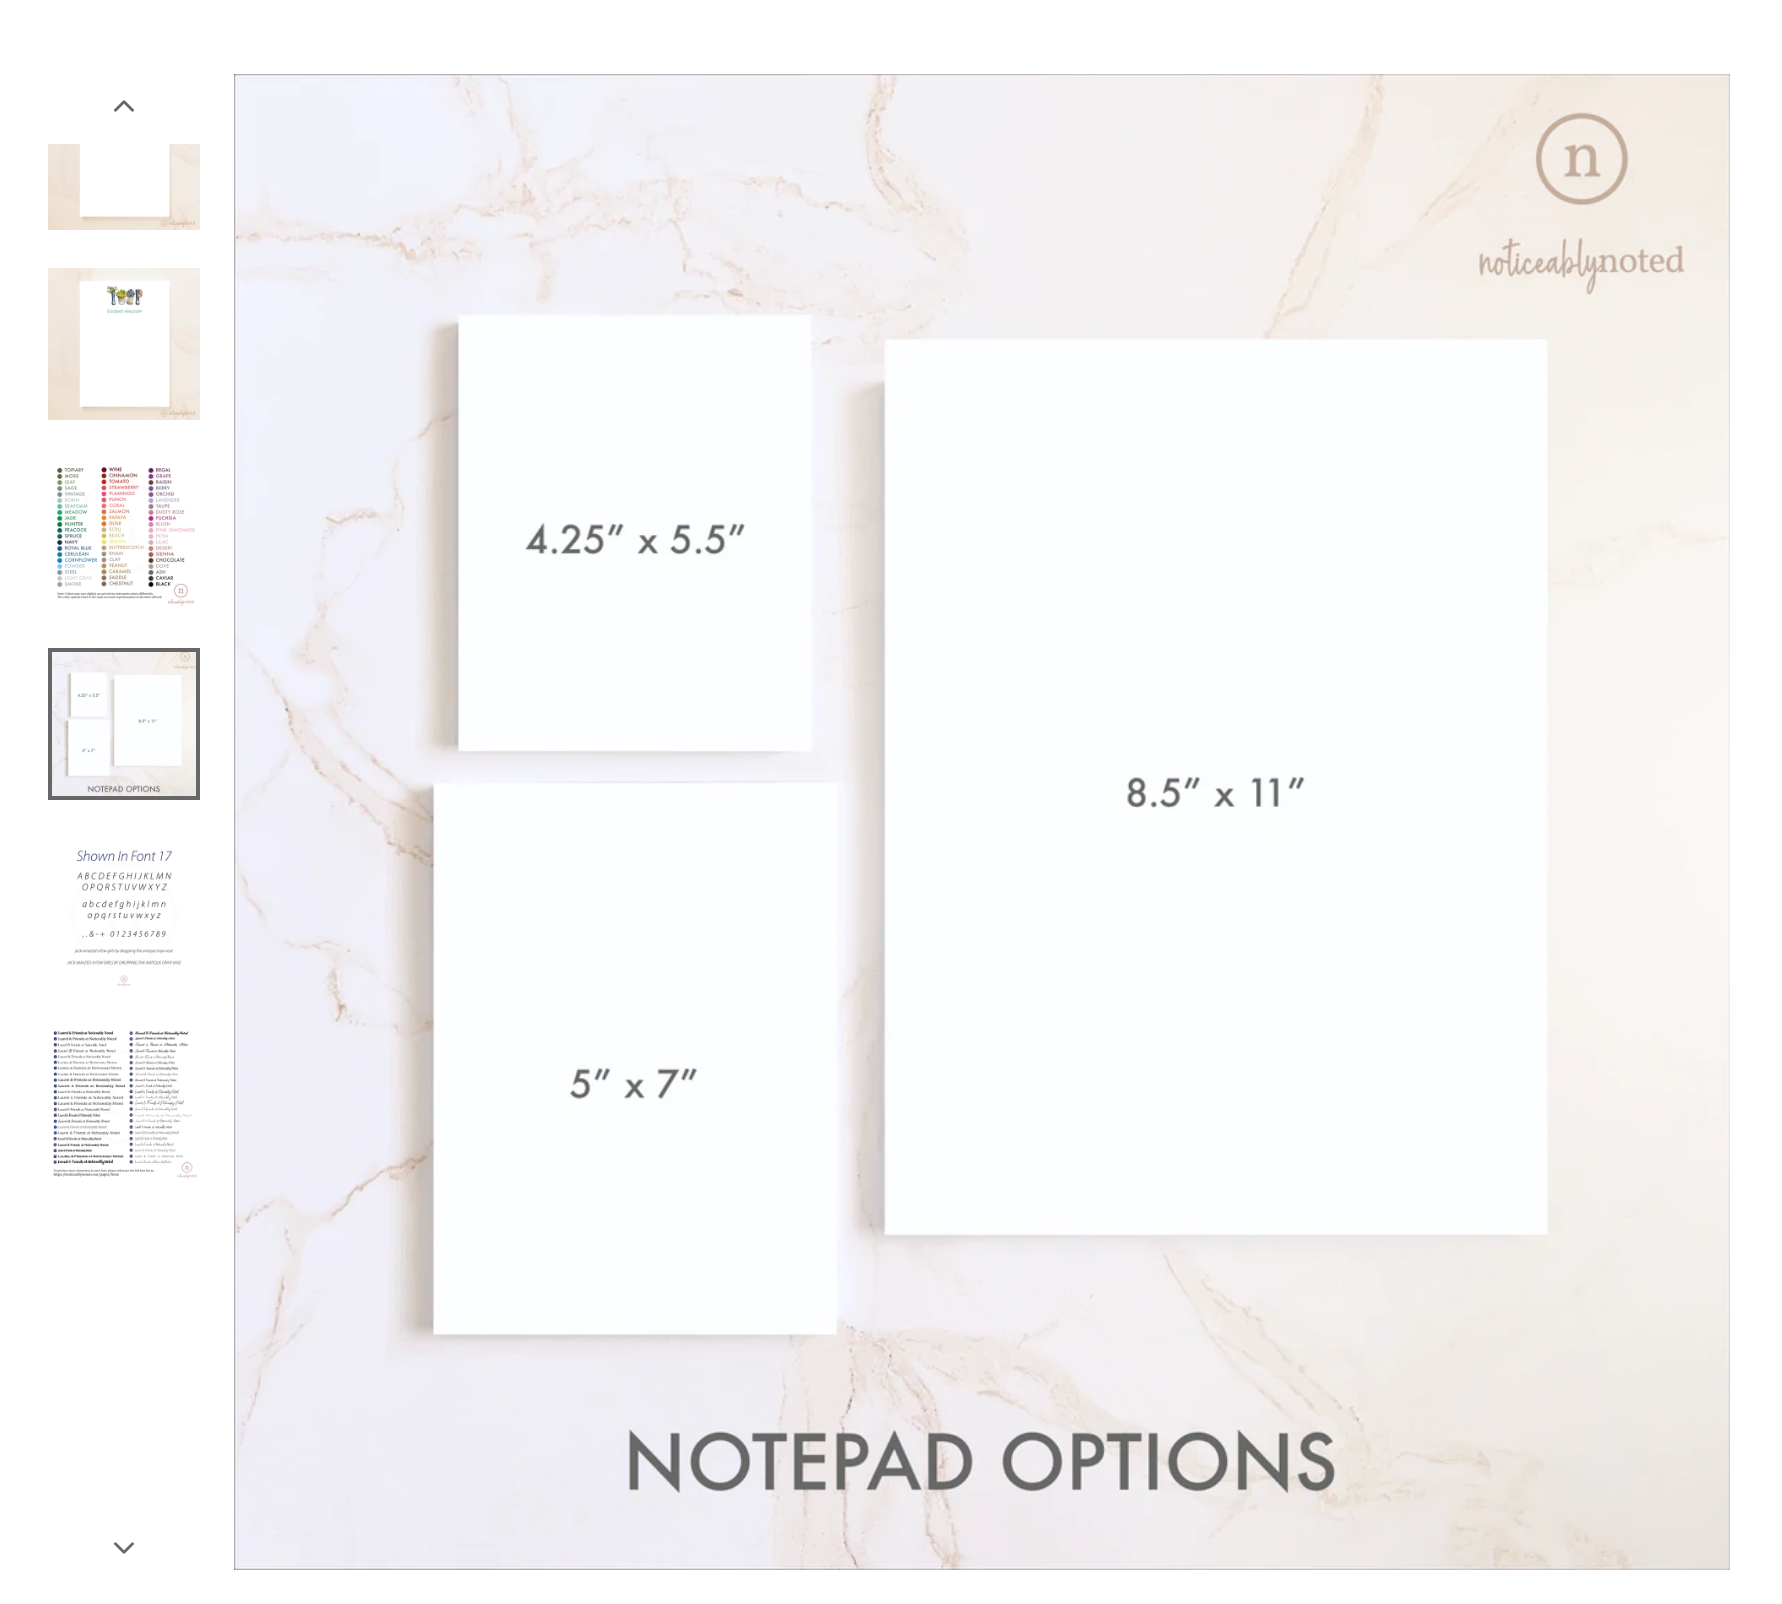 Notepad Size Comparisons | Noticeably Noted